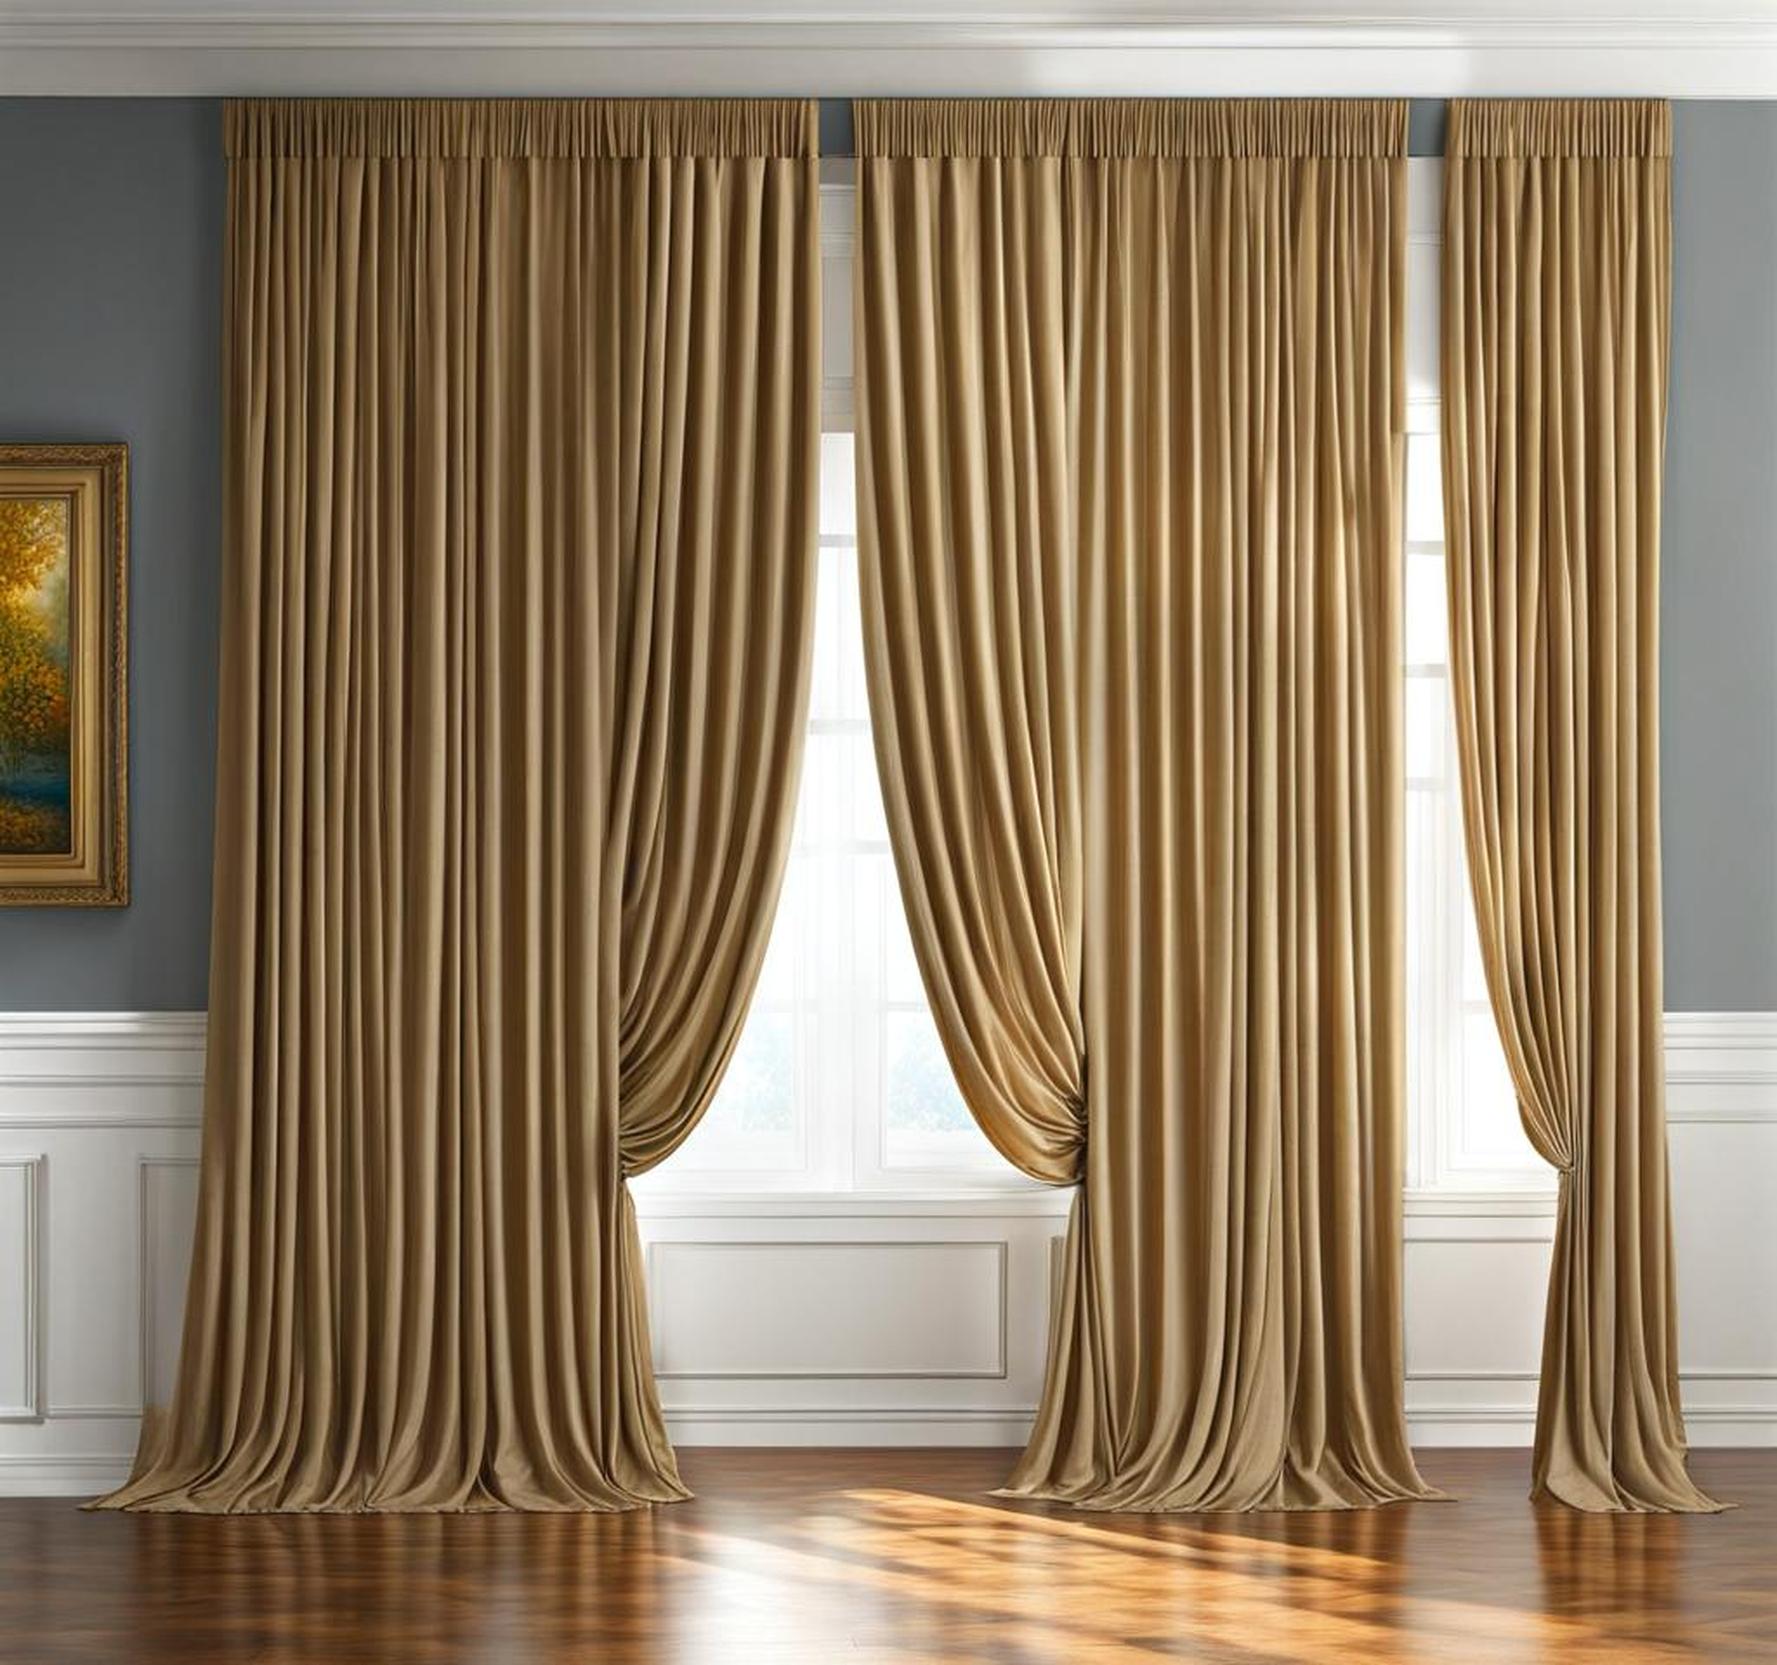 should drapes touch the floor